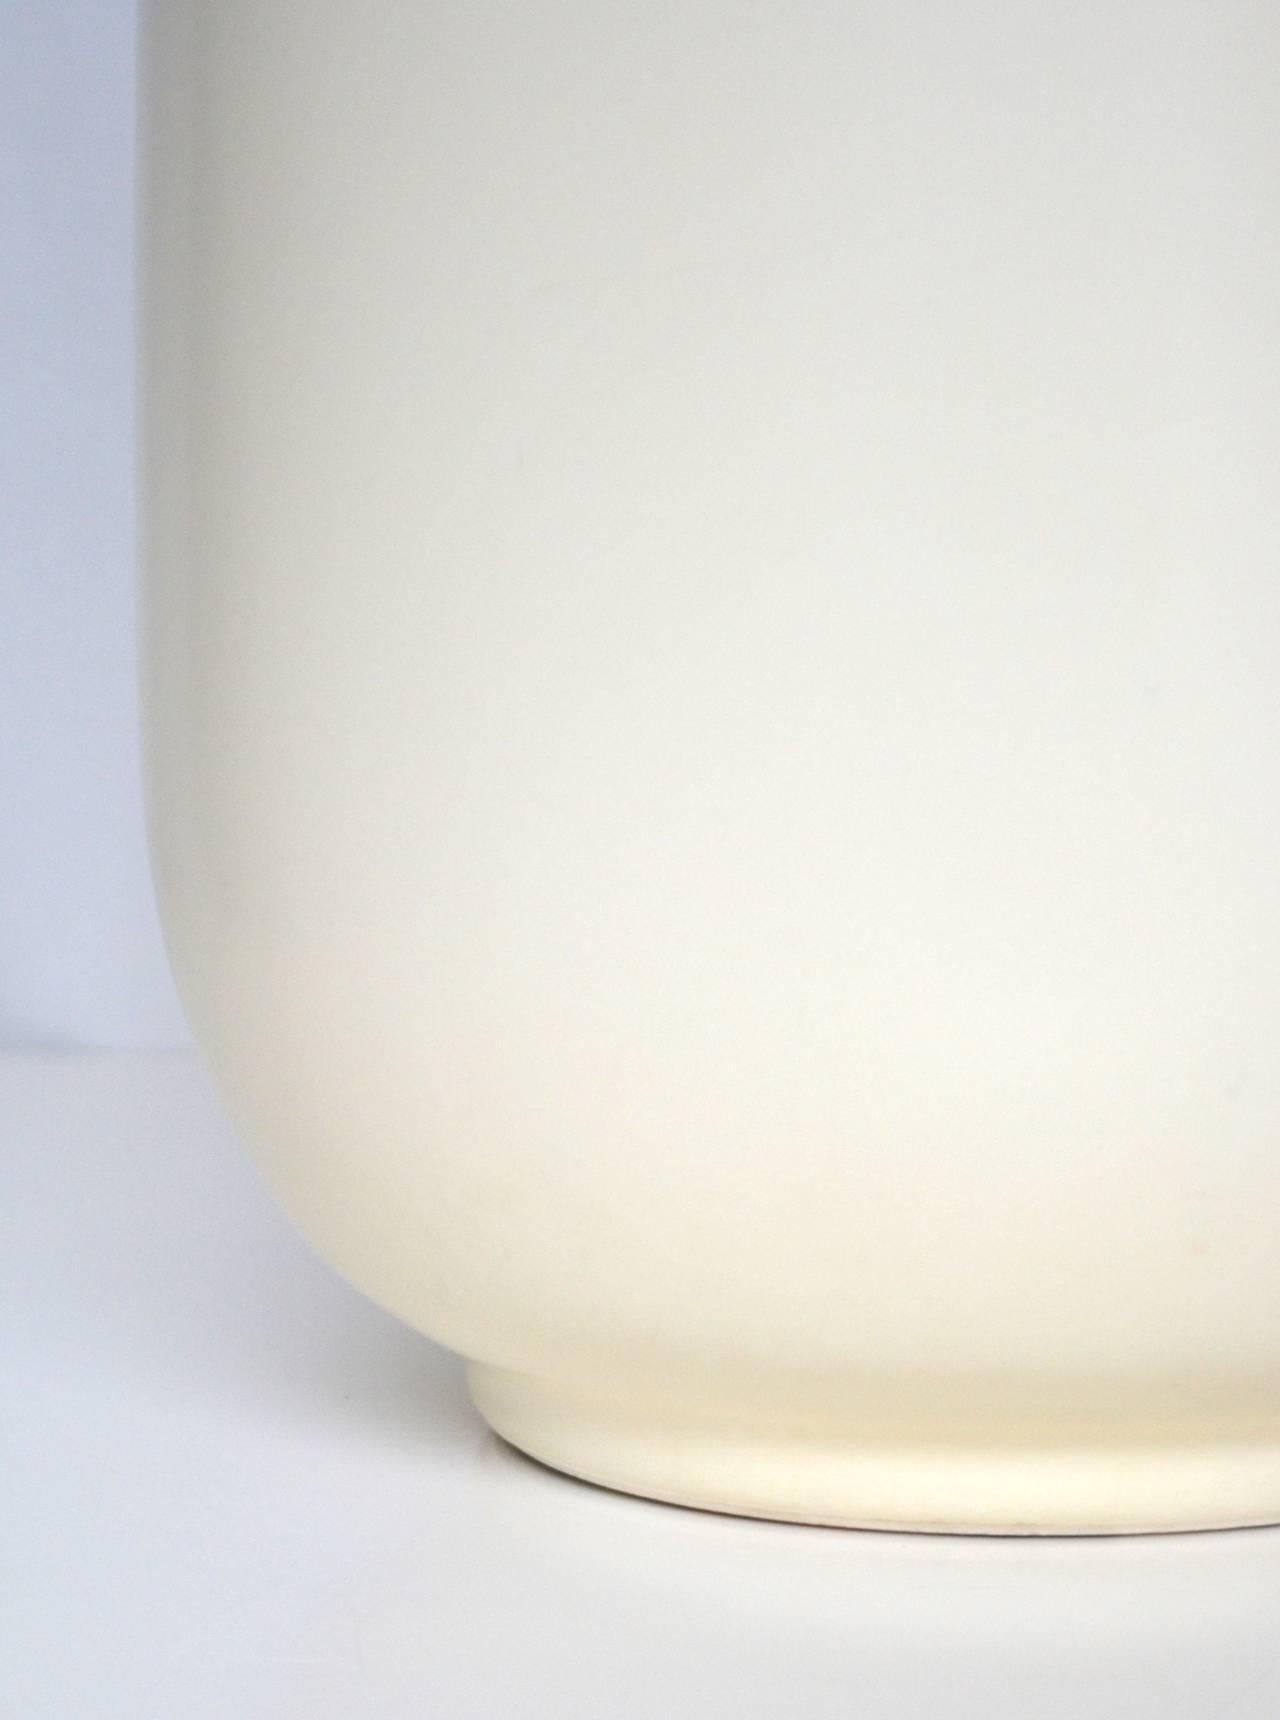 Late 20th Century Midcentury White Glazed Ovoid Form Table Lamp For Sale